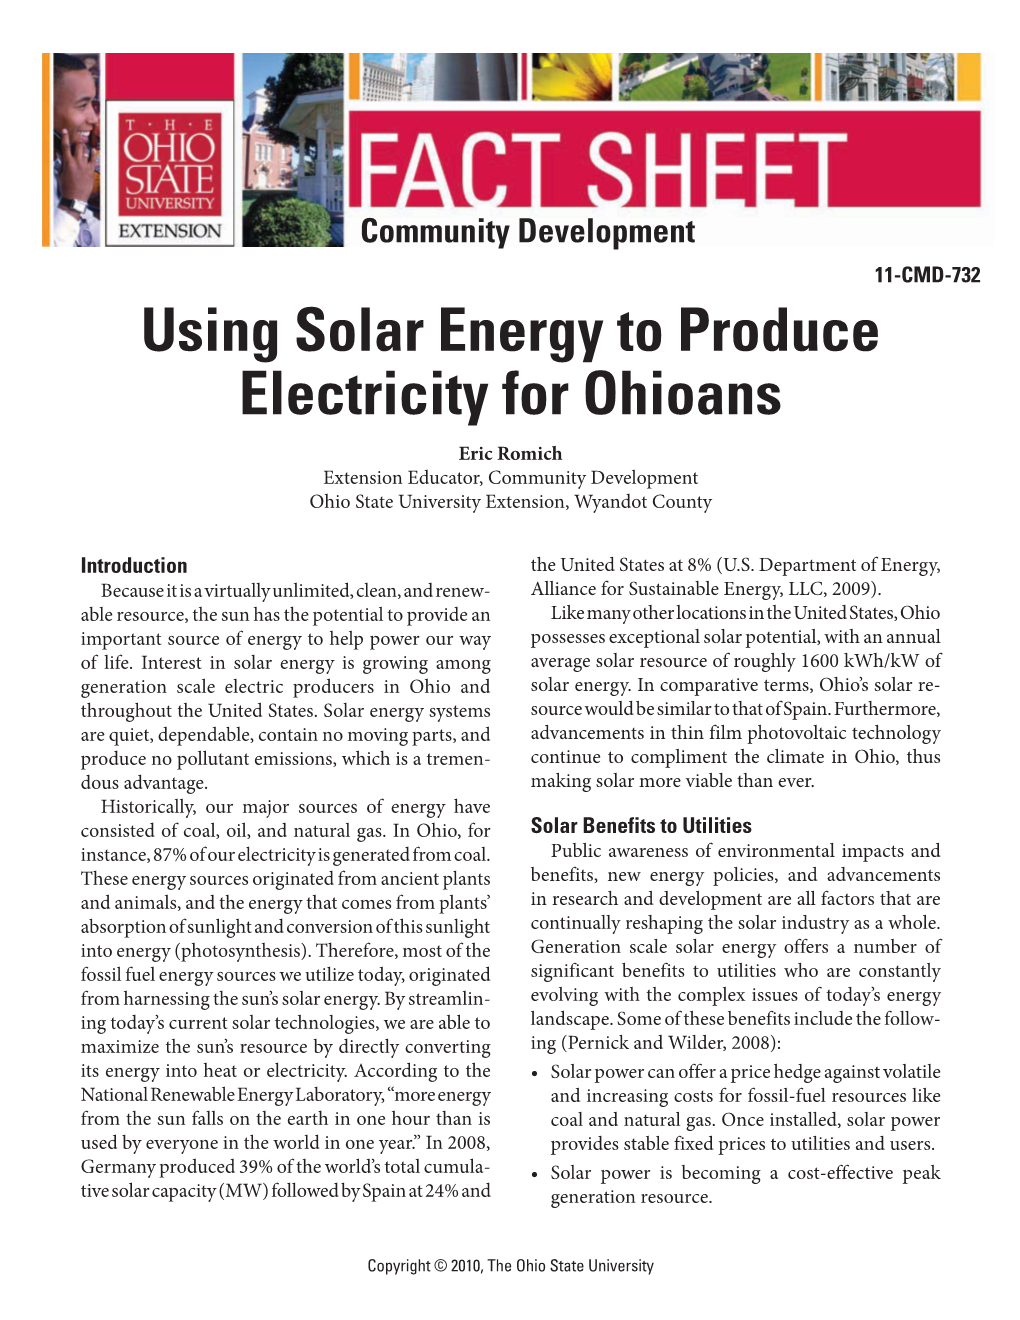 Using Solar Energy to Produce Electricity for Ohioans Eric Romich Extension Educator, Community Development Ohio State University Extension, Wyandot County